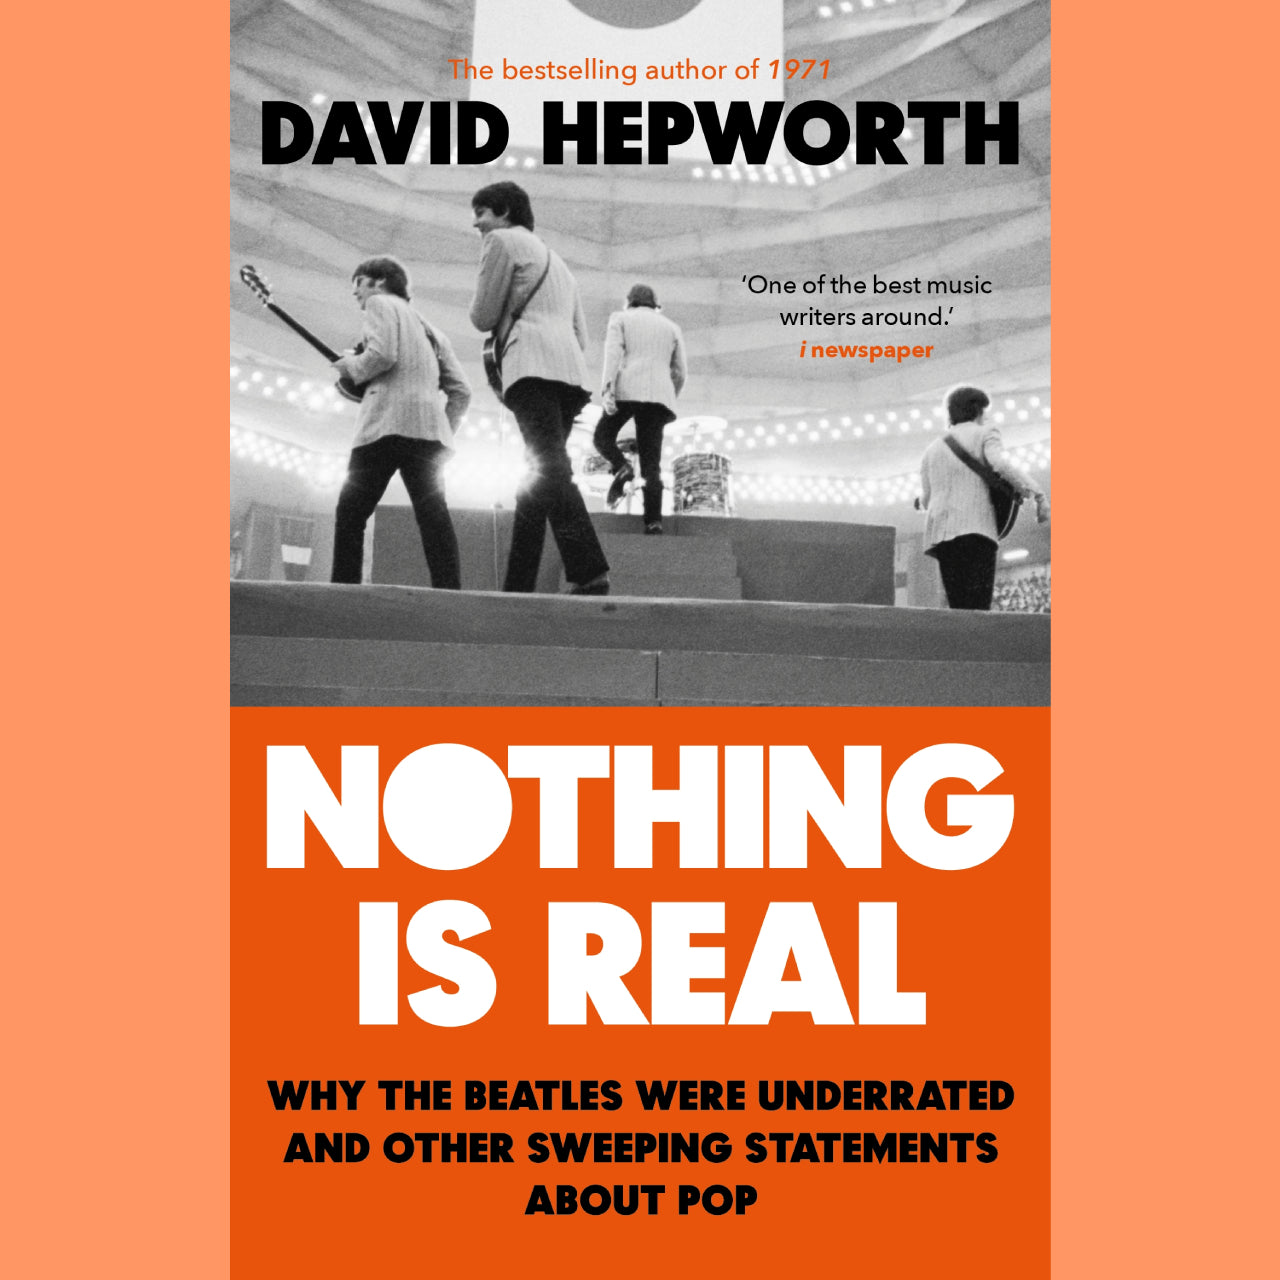 David Hepworth - Nothing is Real | Buy the book from Flying Nun Records